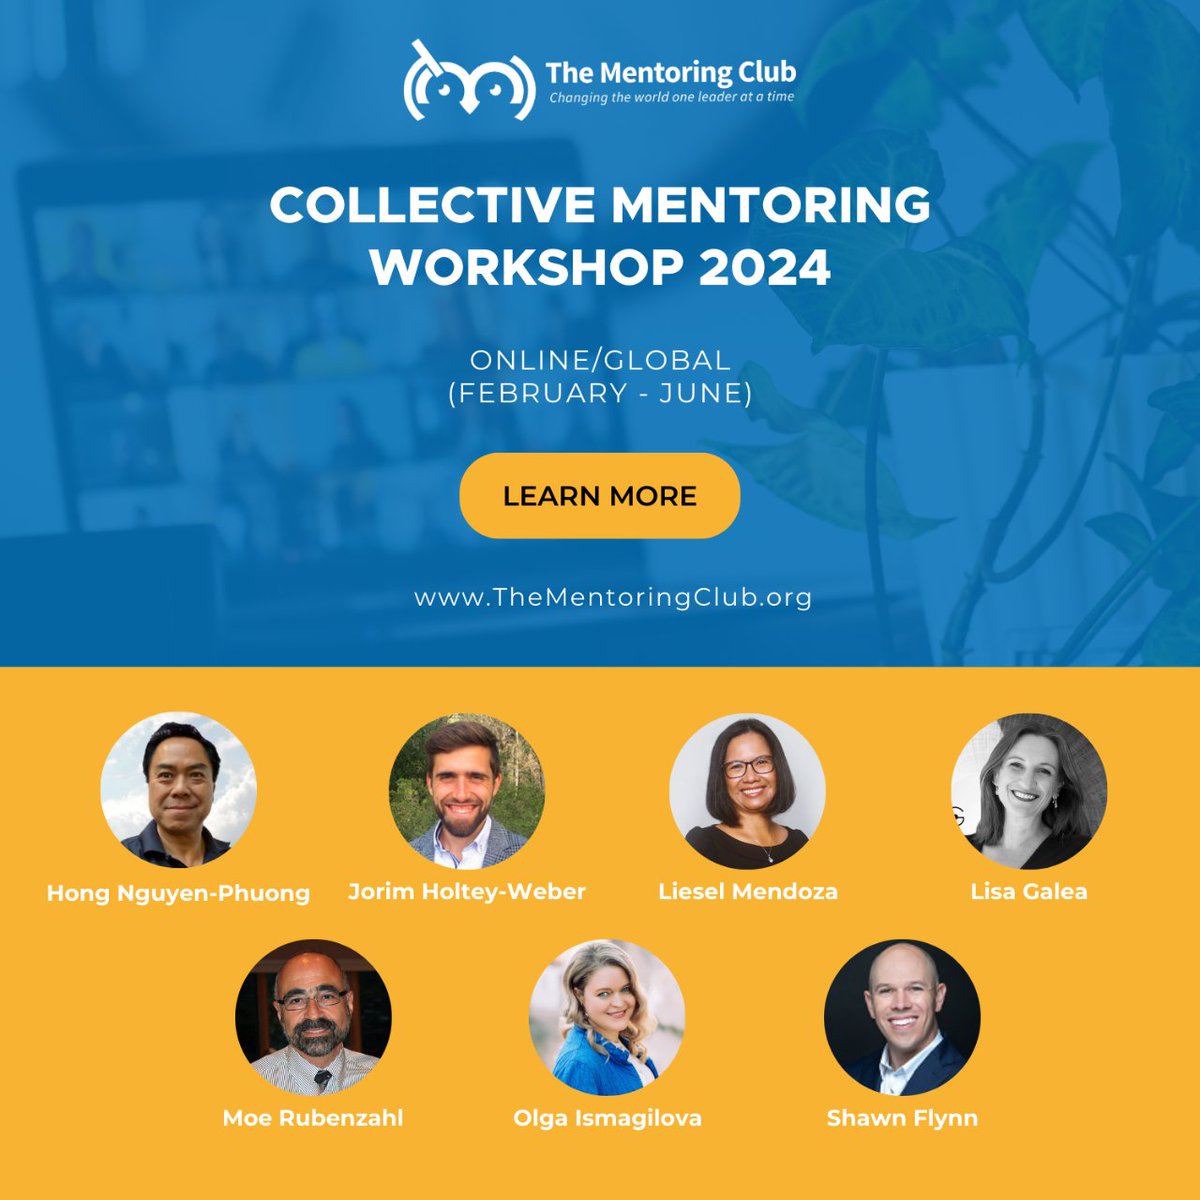 Join our Collective Mentoring Workshop Program as we embark on our second Collective Mentoring Workshop this coming February.😊 Learn more in the comments.👇 #Mentoring #MentoringMatters #Leaders #Mentor #OnlineWorkshop #PersonalDevelopment #PersonalGrowthJourney